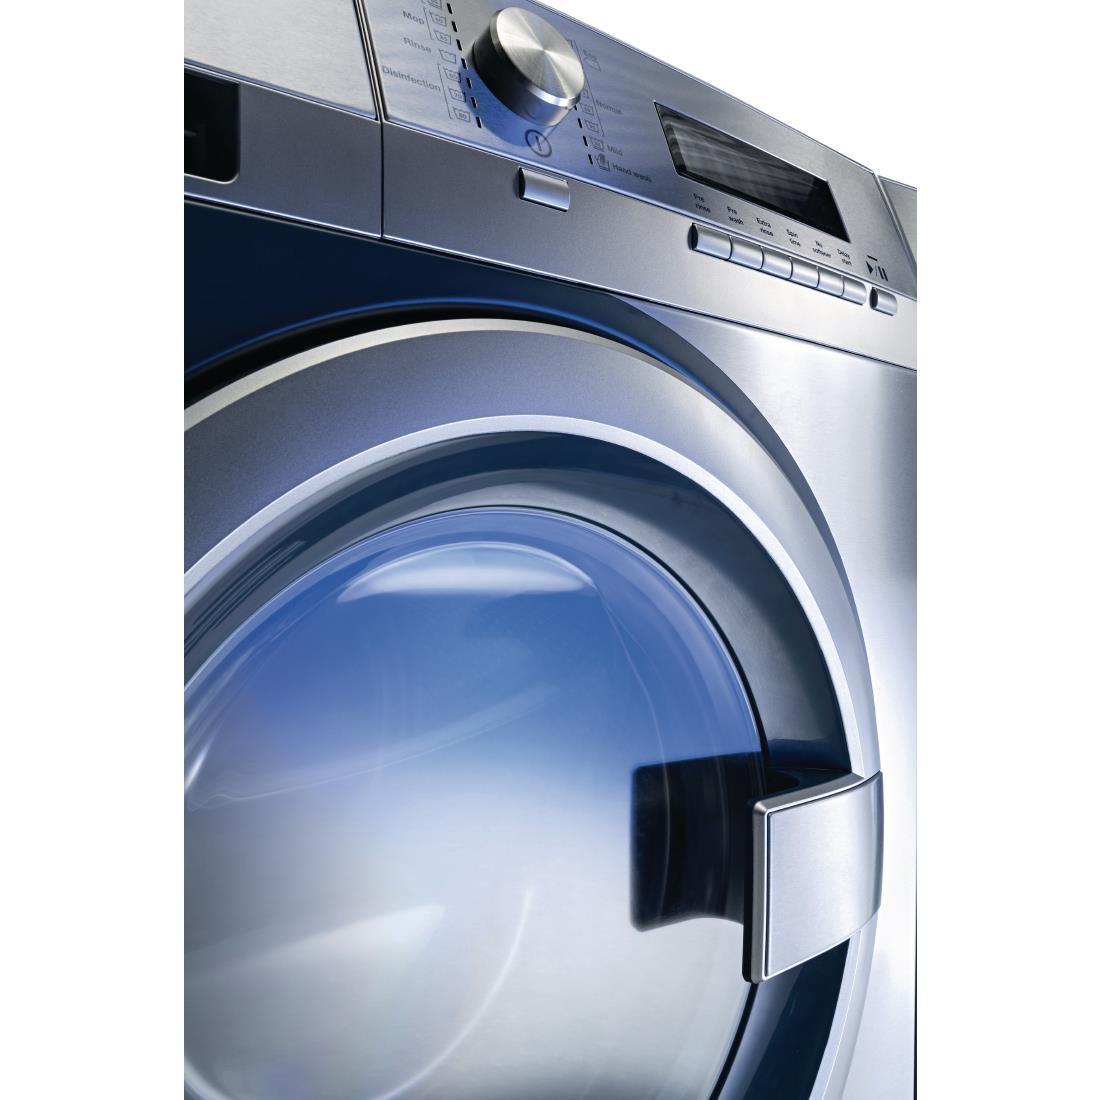 Electrolux myPRO Commercial Washing Machine WE170P With Pump - CK375  - 7